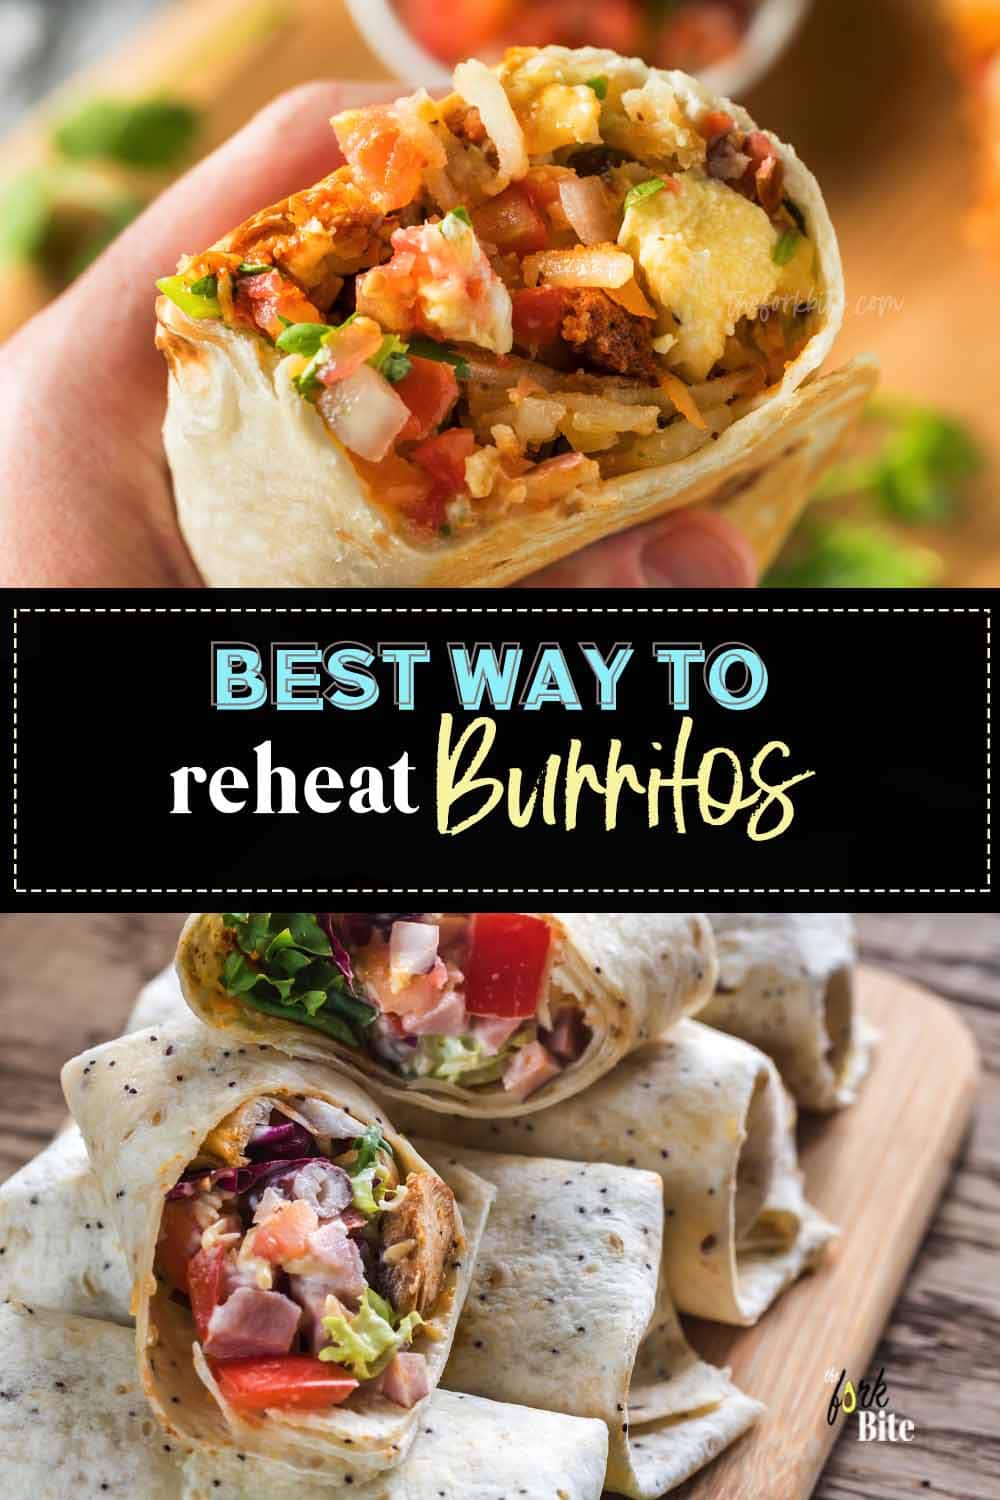 There are various ways you can reheat a Burrito. You can deconstruct it before warming or heat it intact. They can be done in the oven, in a skillet, or a microwave.